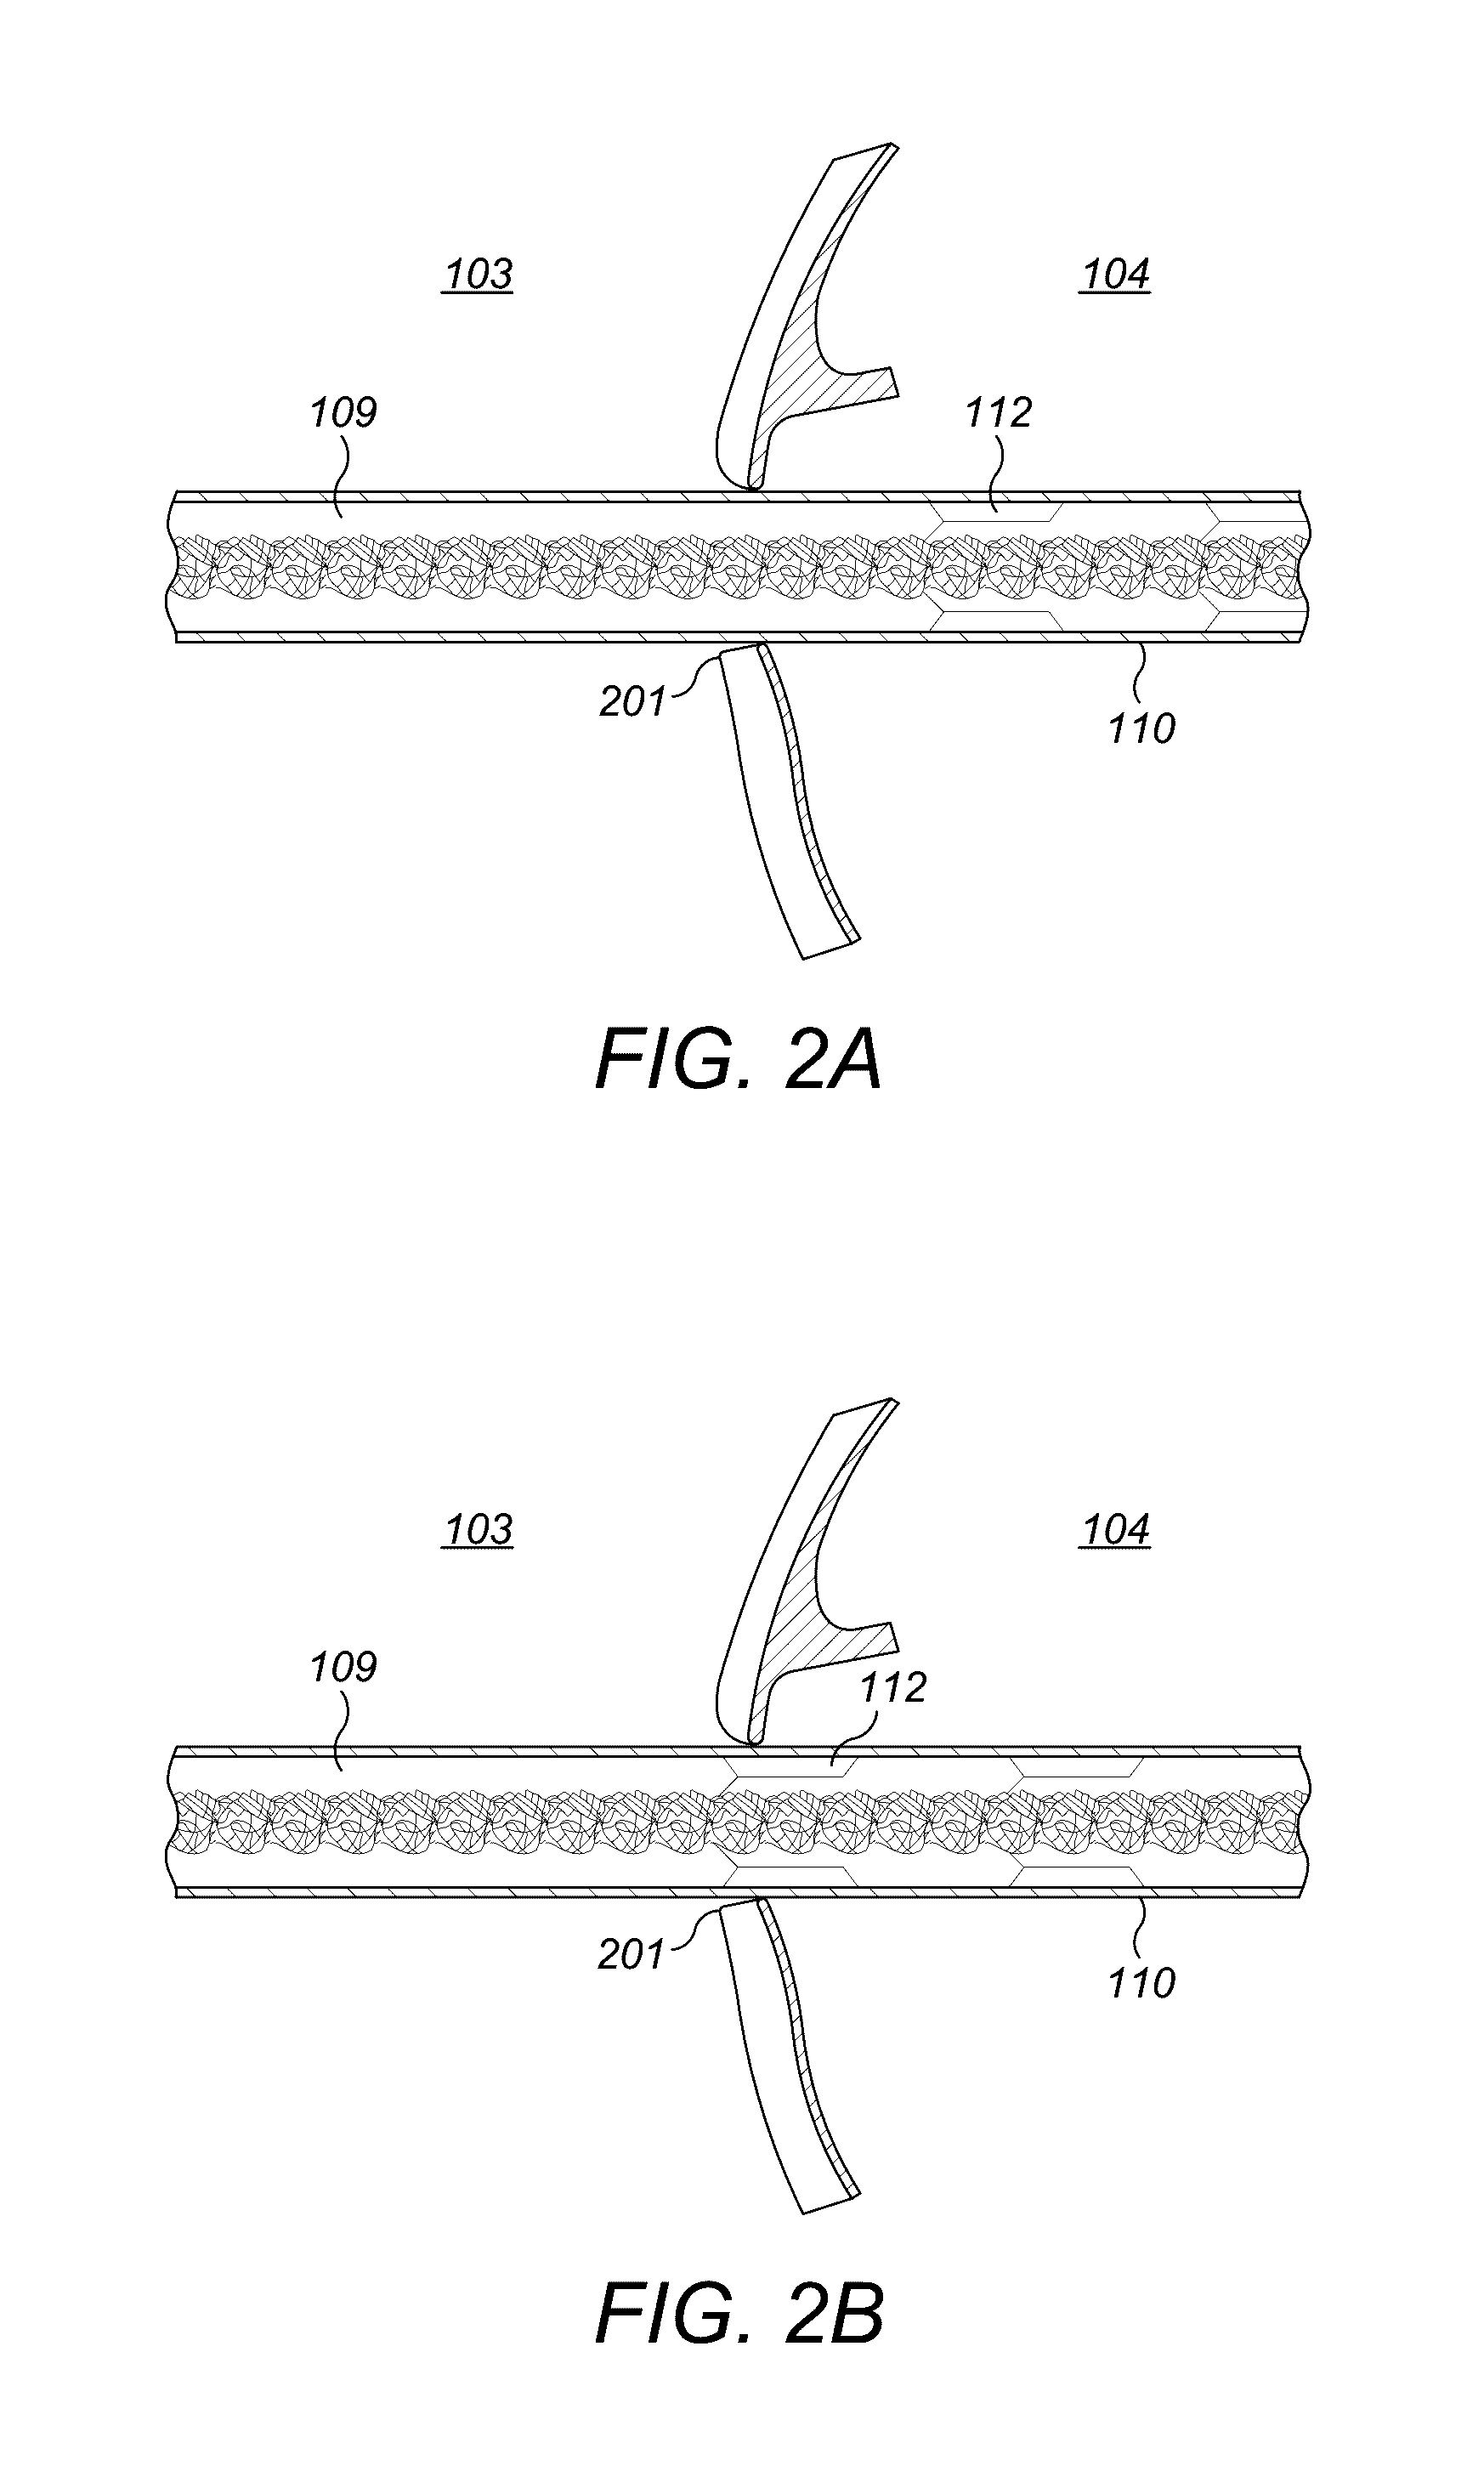 Modified electrode lead for cochlear implants